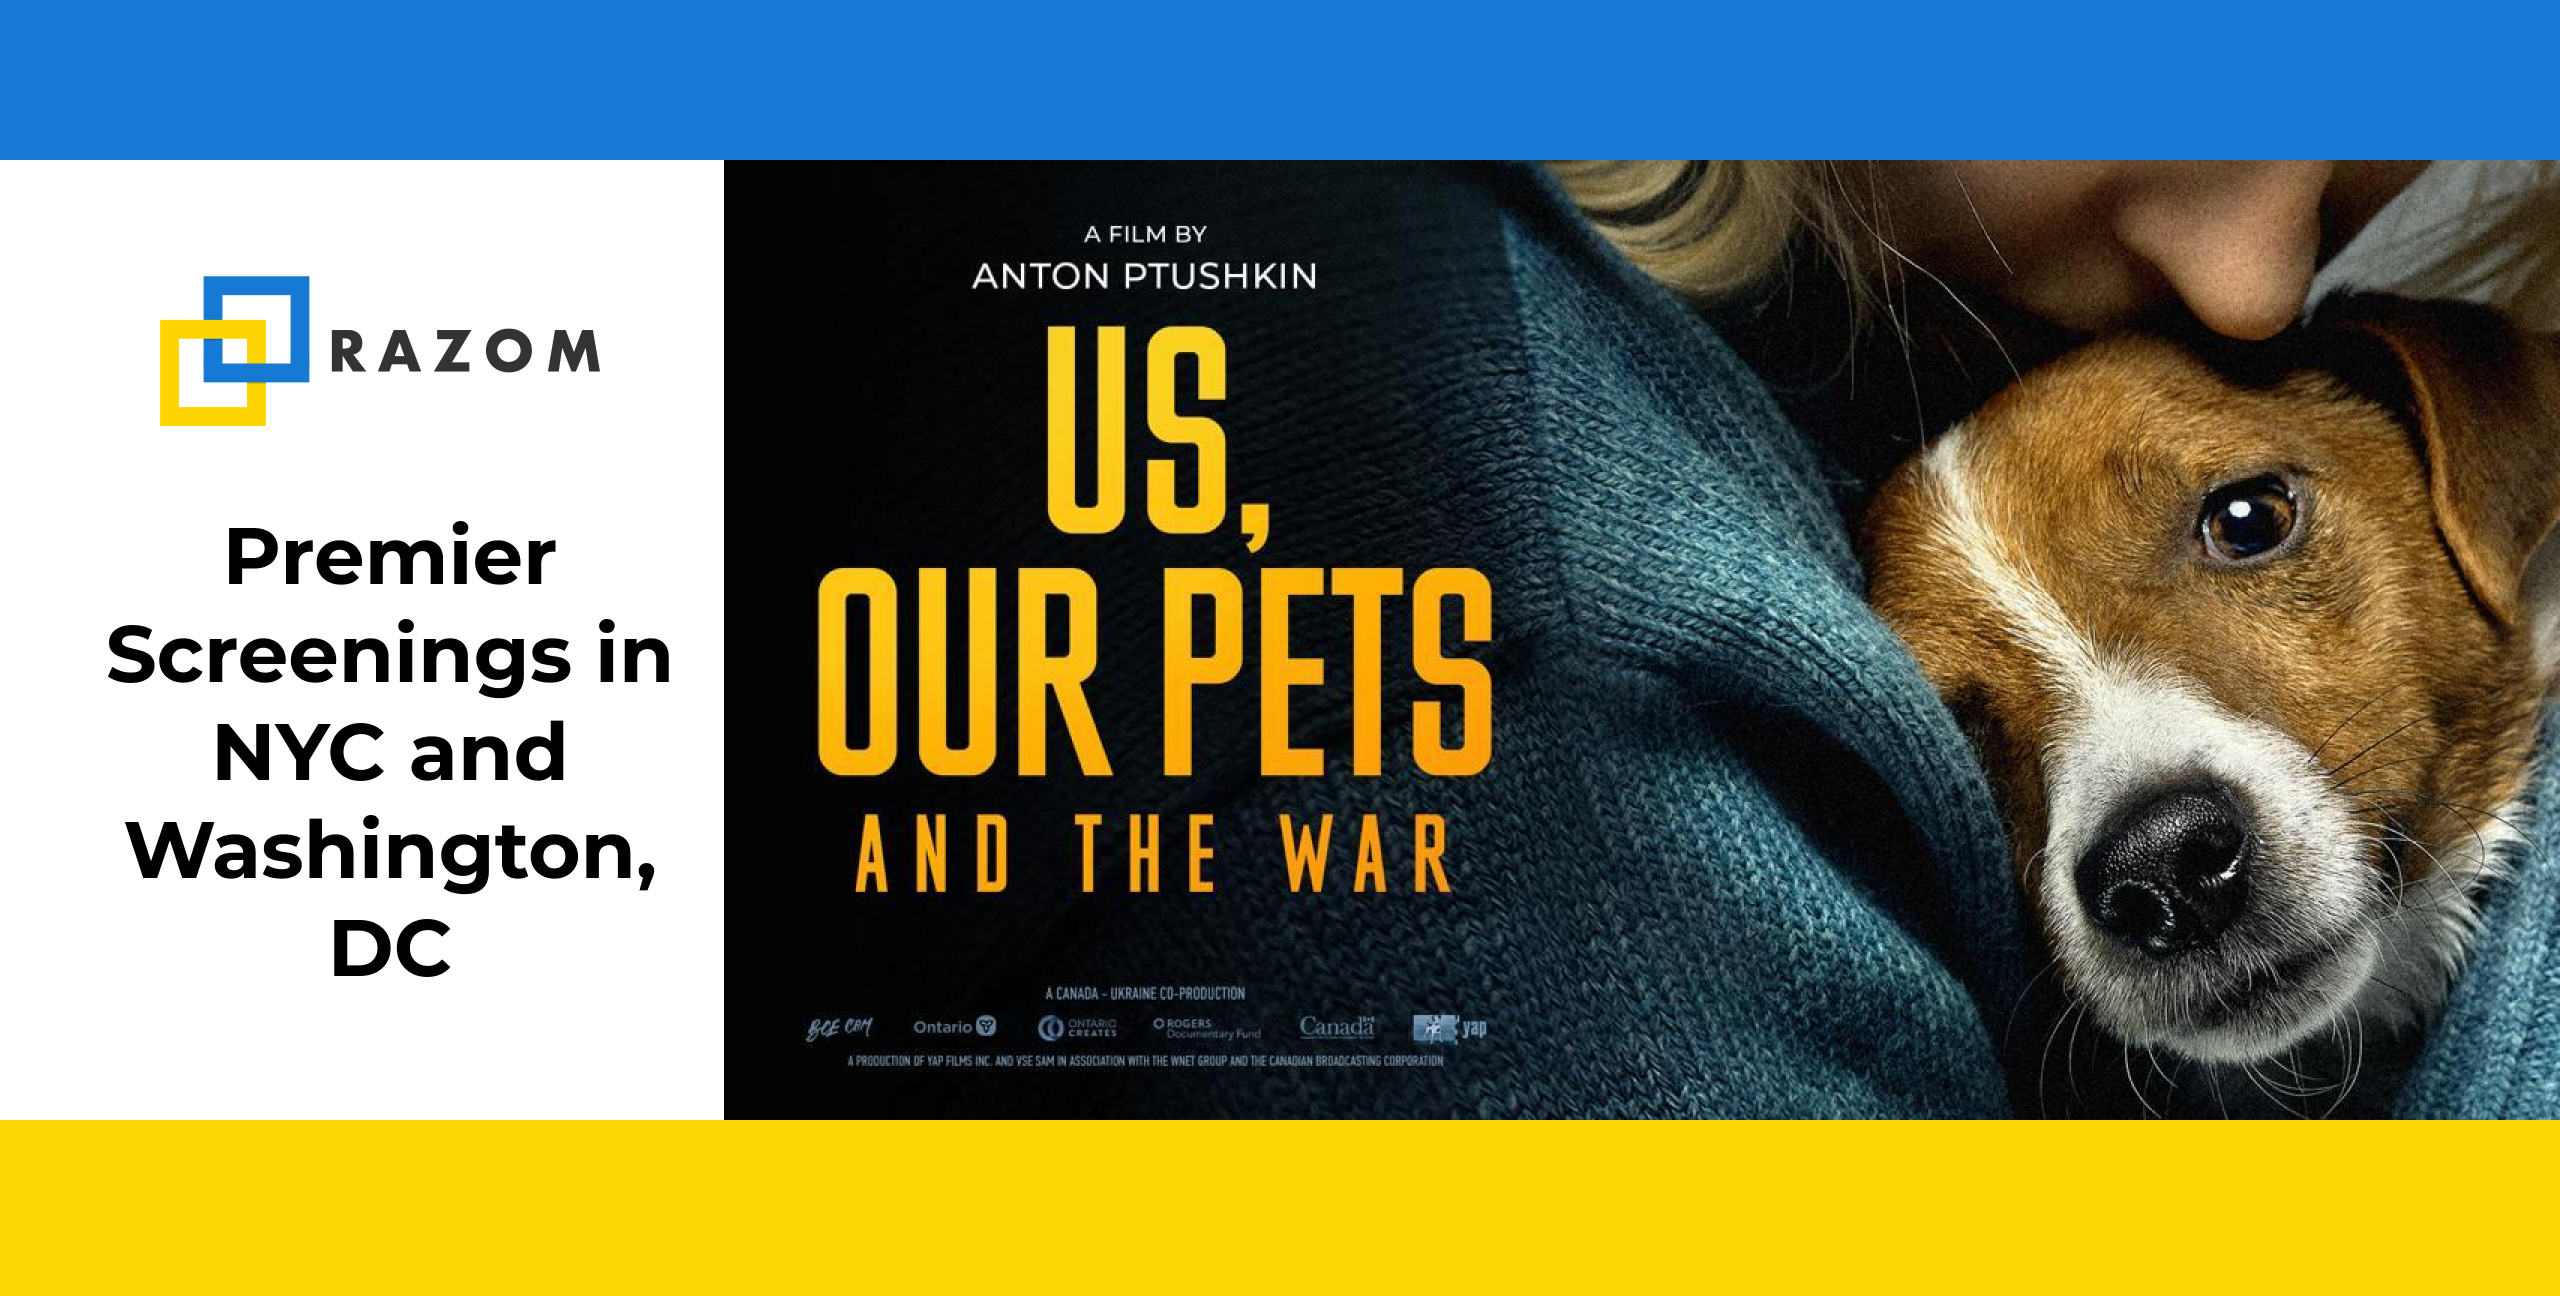 Premier Screenings of “Us, Our Pets, and the War” by Anton Ptushkin in NYC and DC